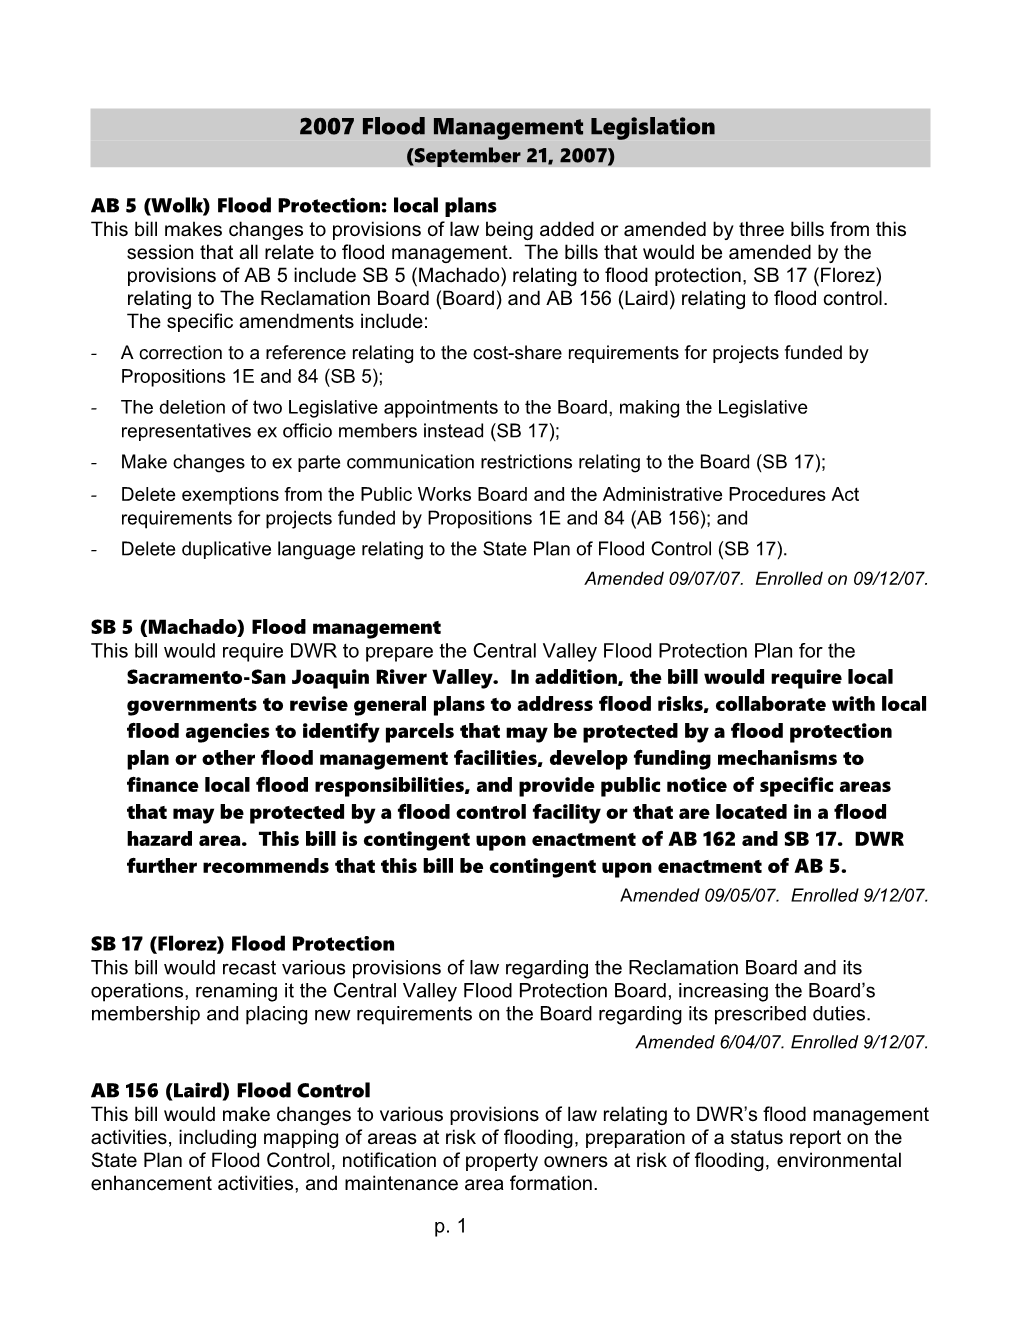 AB 5 (Wolk) Flood Protection: Local Plans